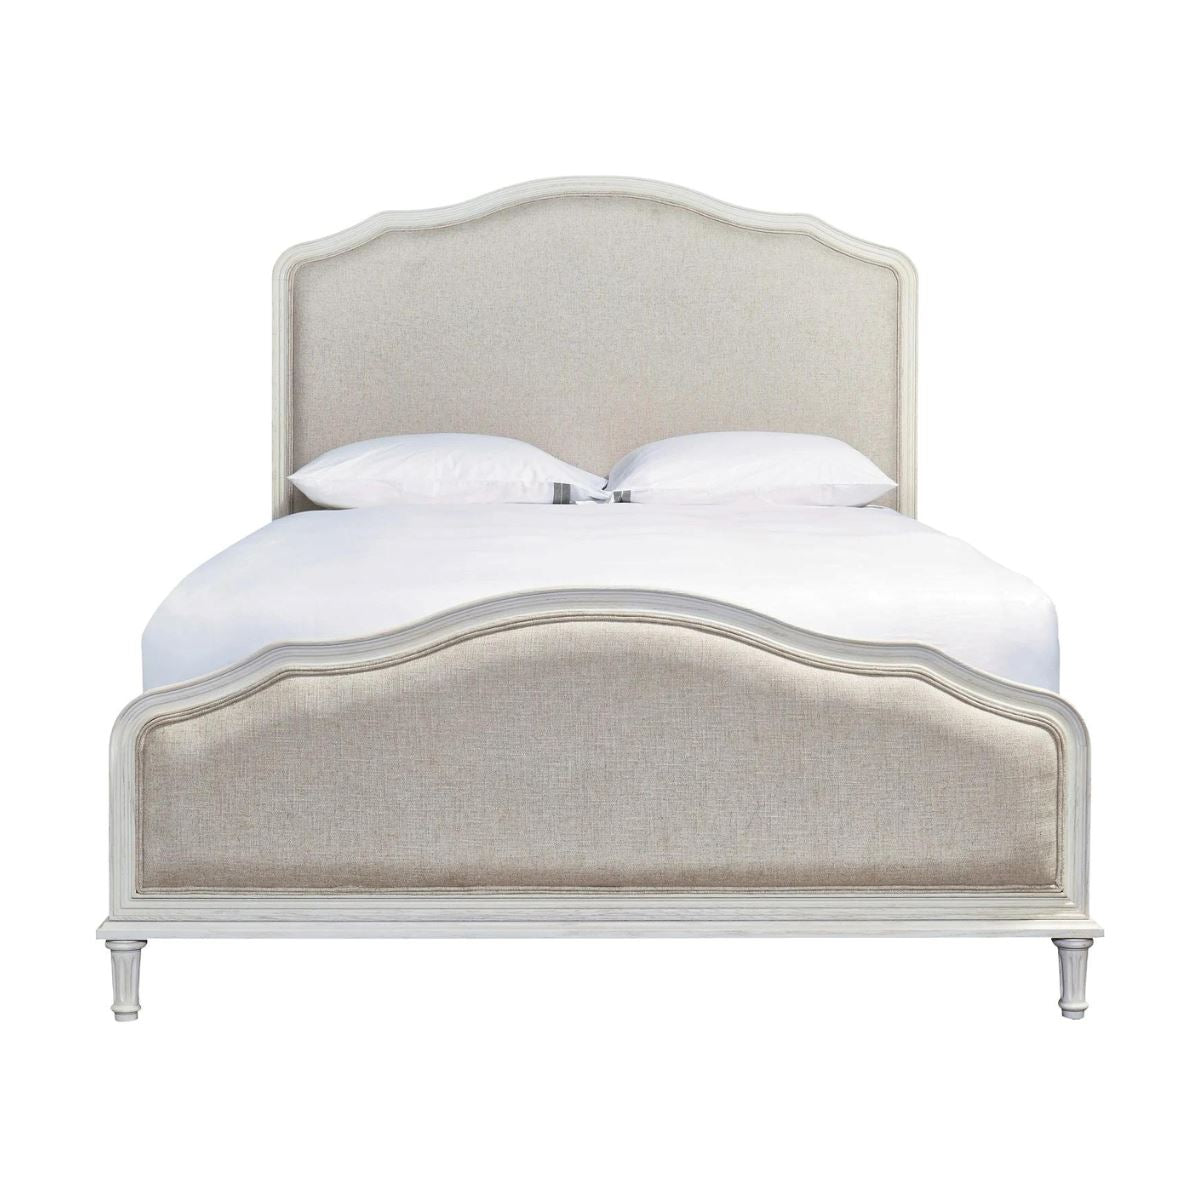 Abigail Bed Frame - King. Front view.